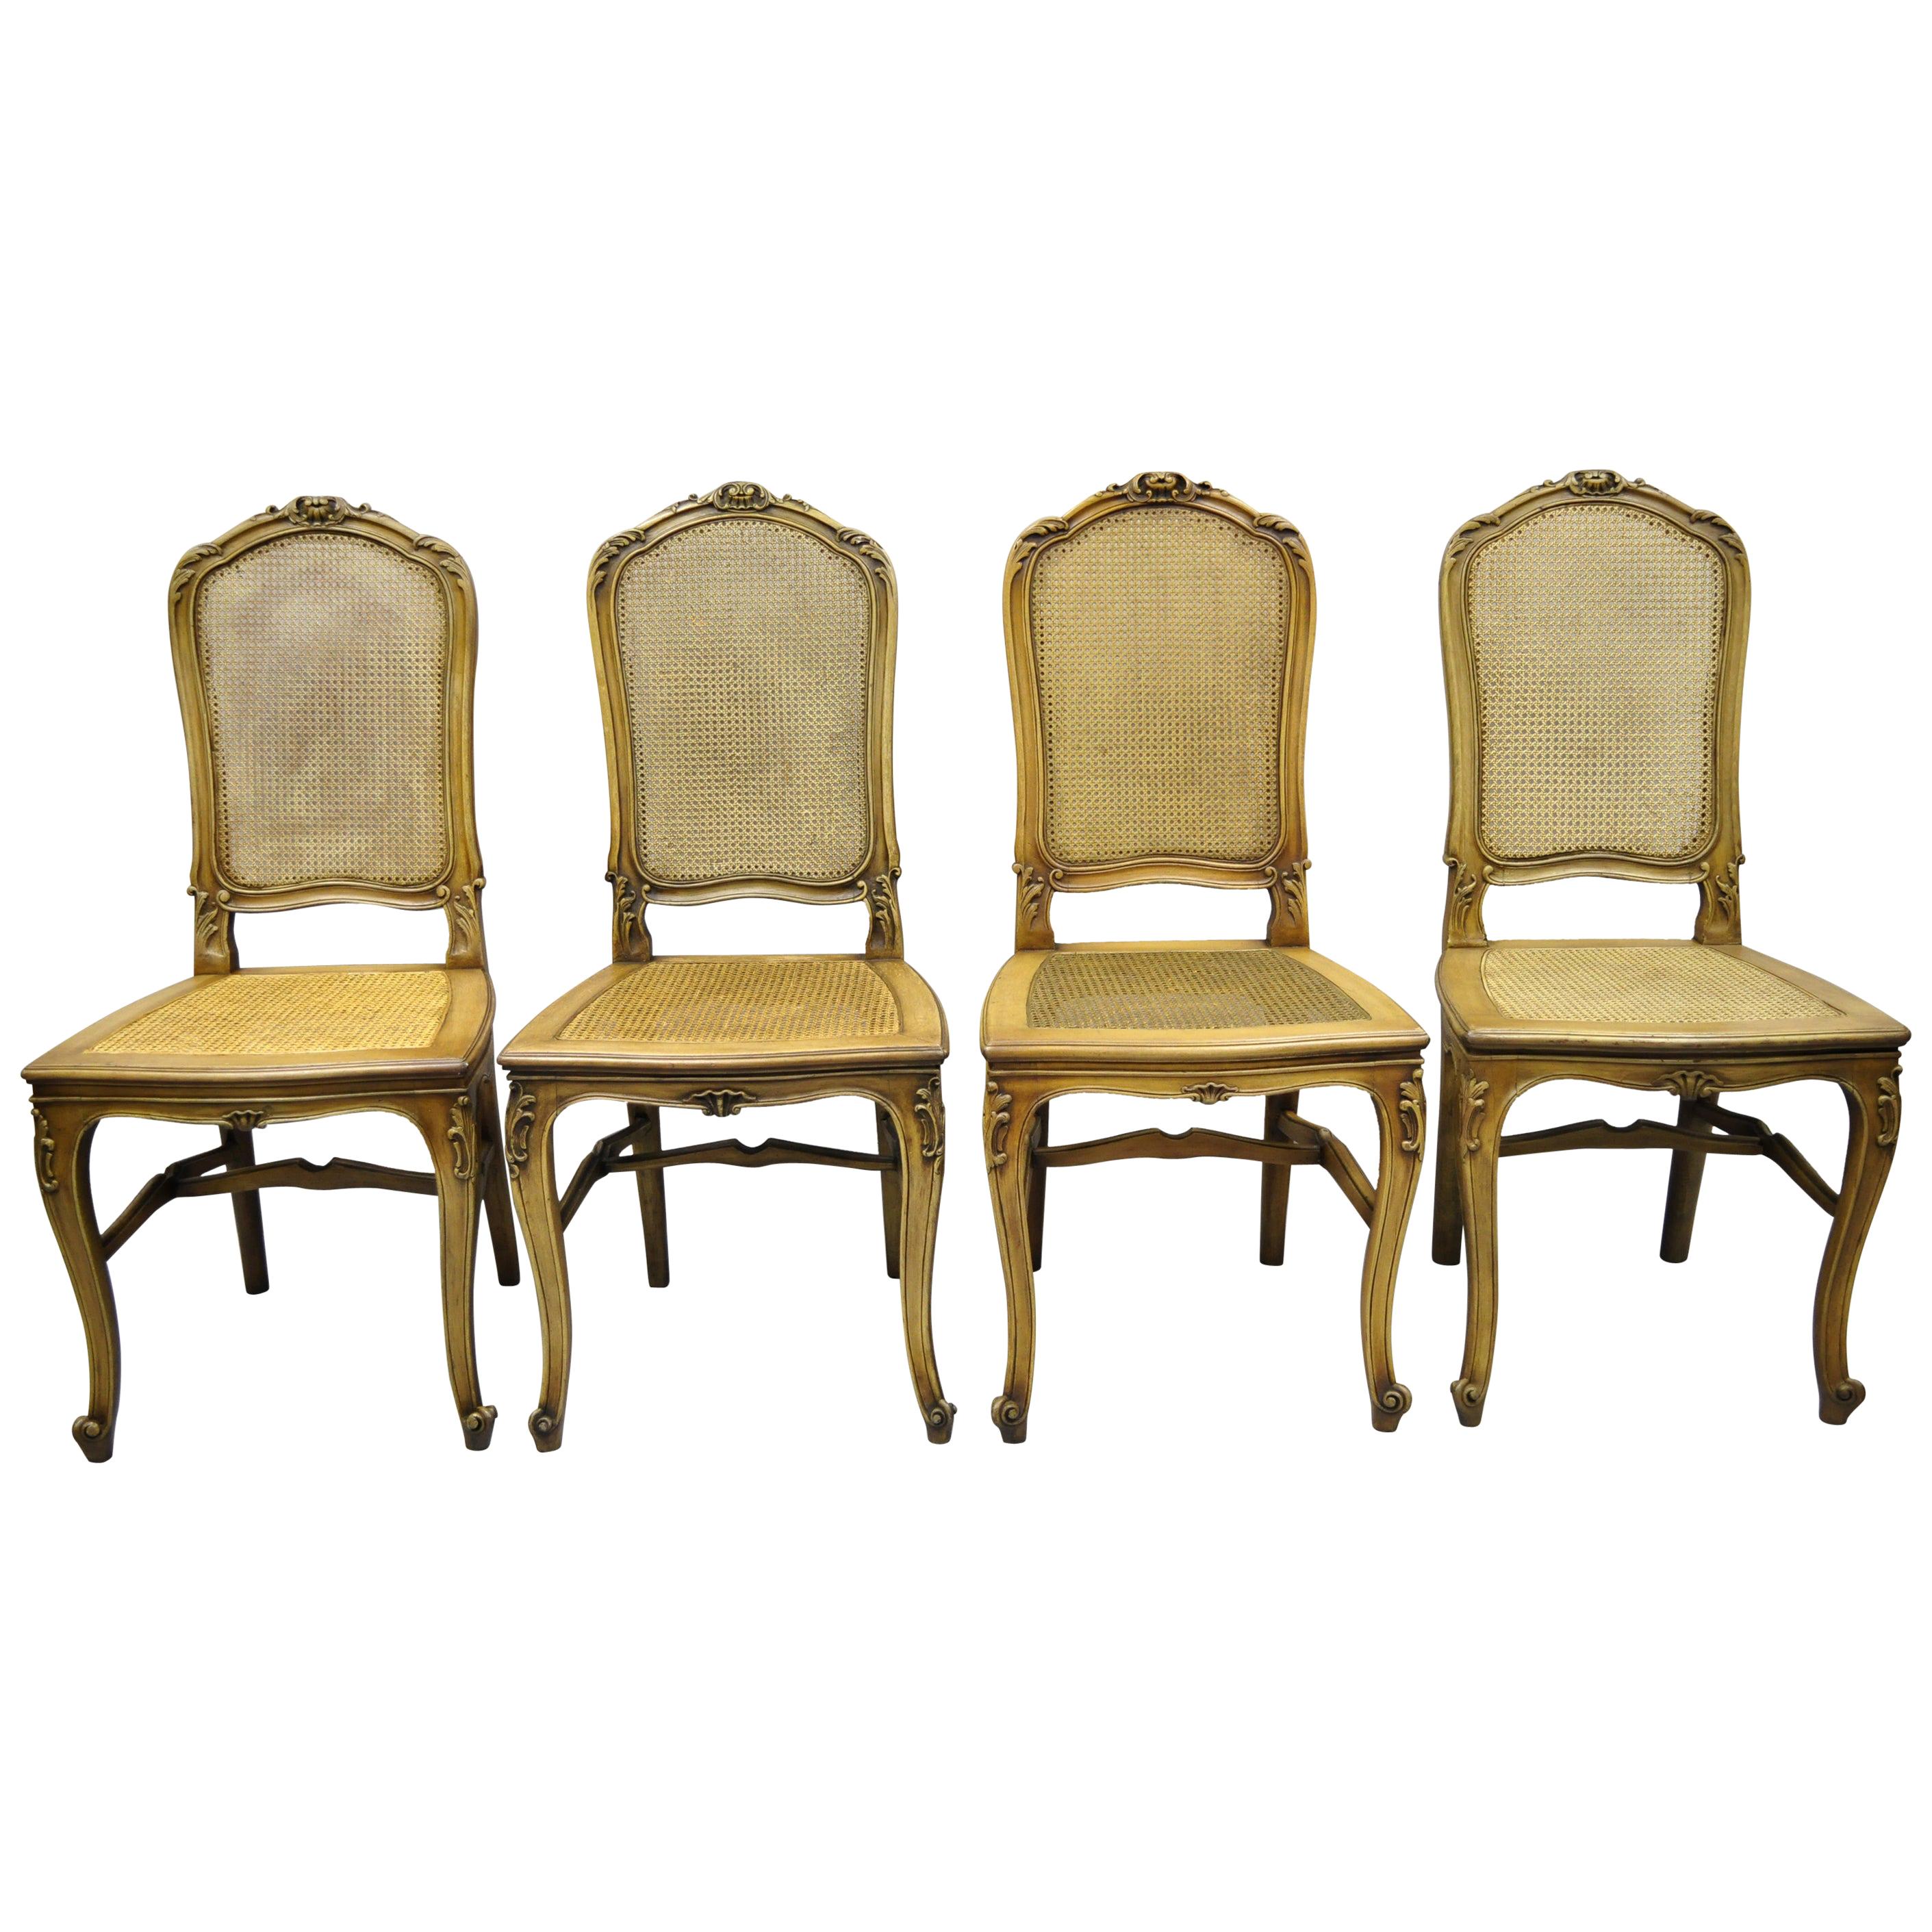 4 Antique French Provincial Louis XV Style Carved Walnut and Cane Dining Chairs